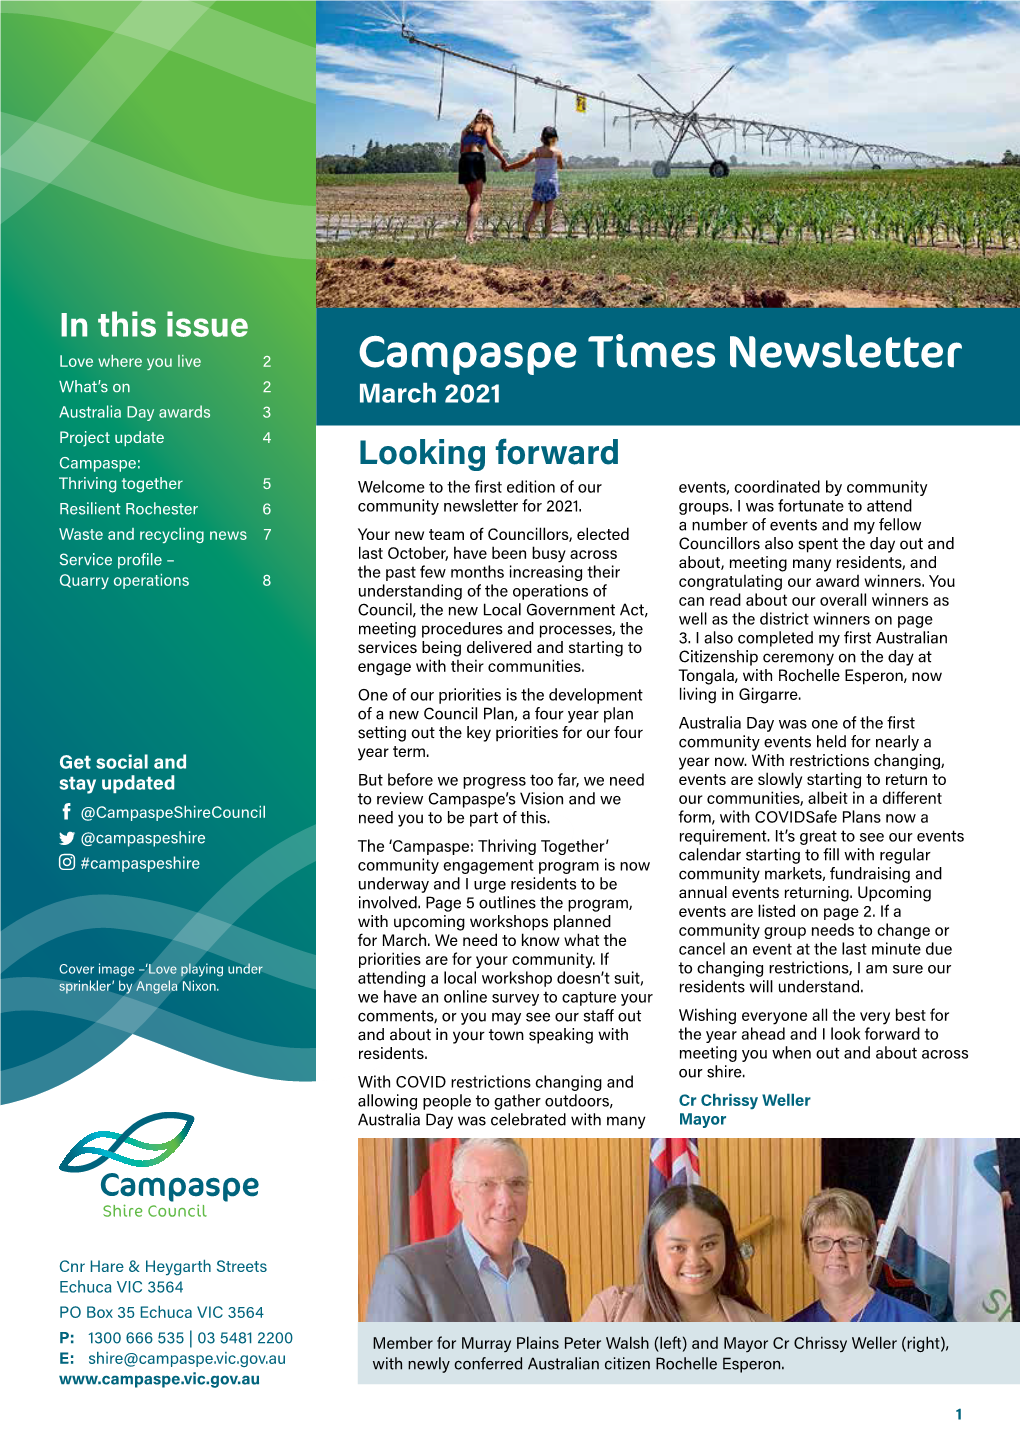 Campaspe Times Newsletter